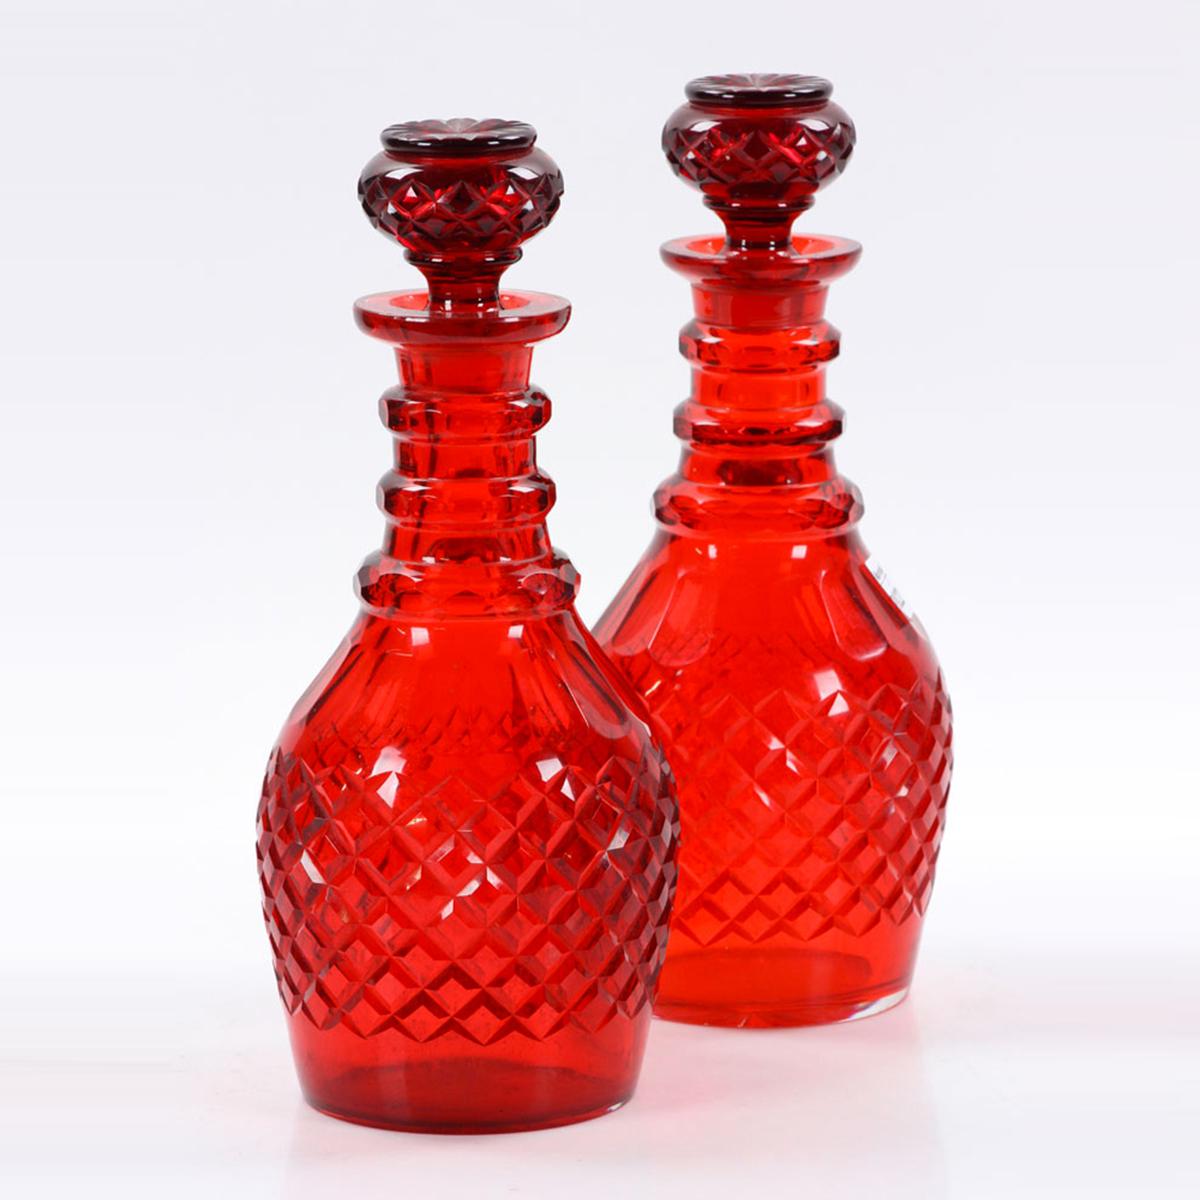 These large Bohemian decanters are an incredibly striking scarlet in person. Perfect for adorning open cabinetry, sprucing up your bar, or setting at the center of your next dinner party. 

Date: 19th century
Origin: Bohemia
Dimension: 12 1/2 in